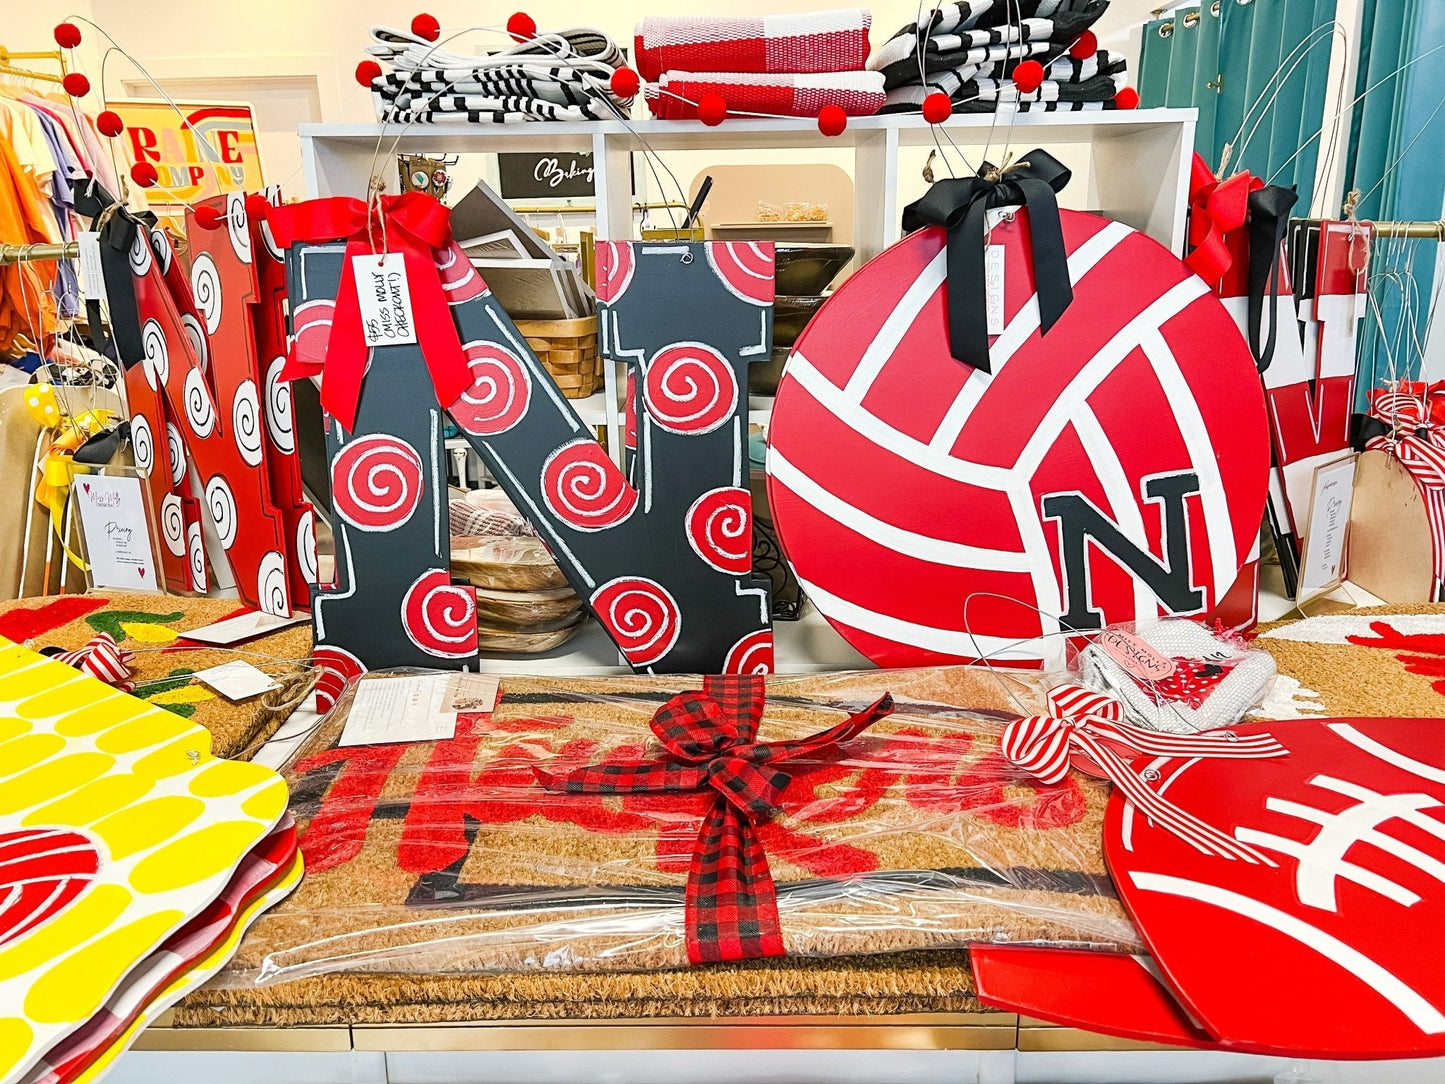 Huskers "N" Red and White Swirl - Self Checkout at Creative Collab Collection - Miss Molly Designs, LLC